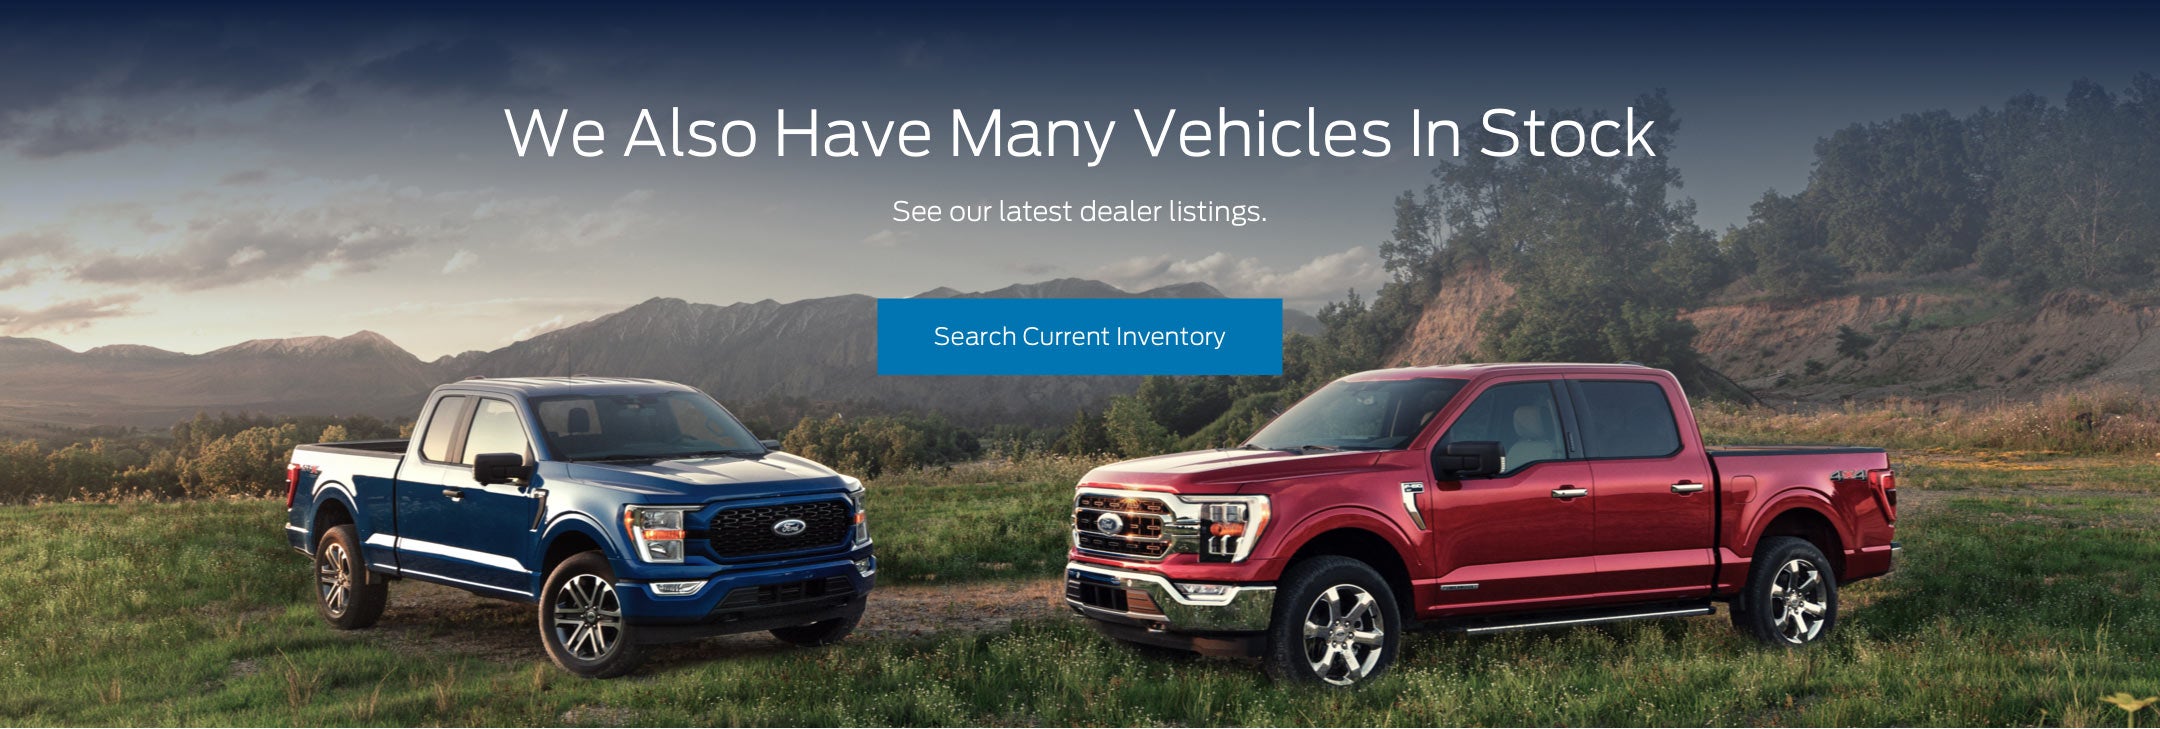 Ford vehicles in stock | Bill Currie Ford in Tampa FL